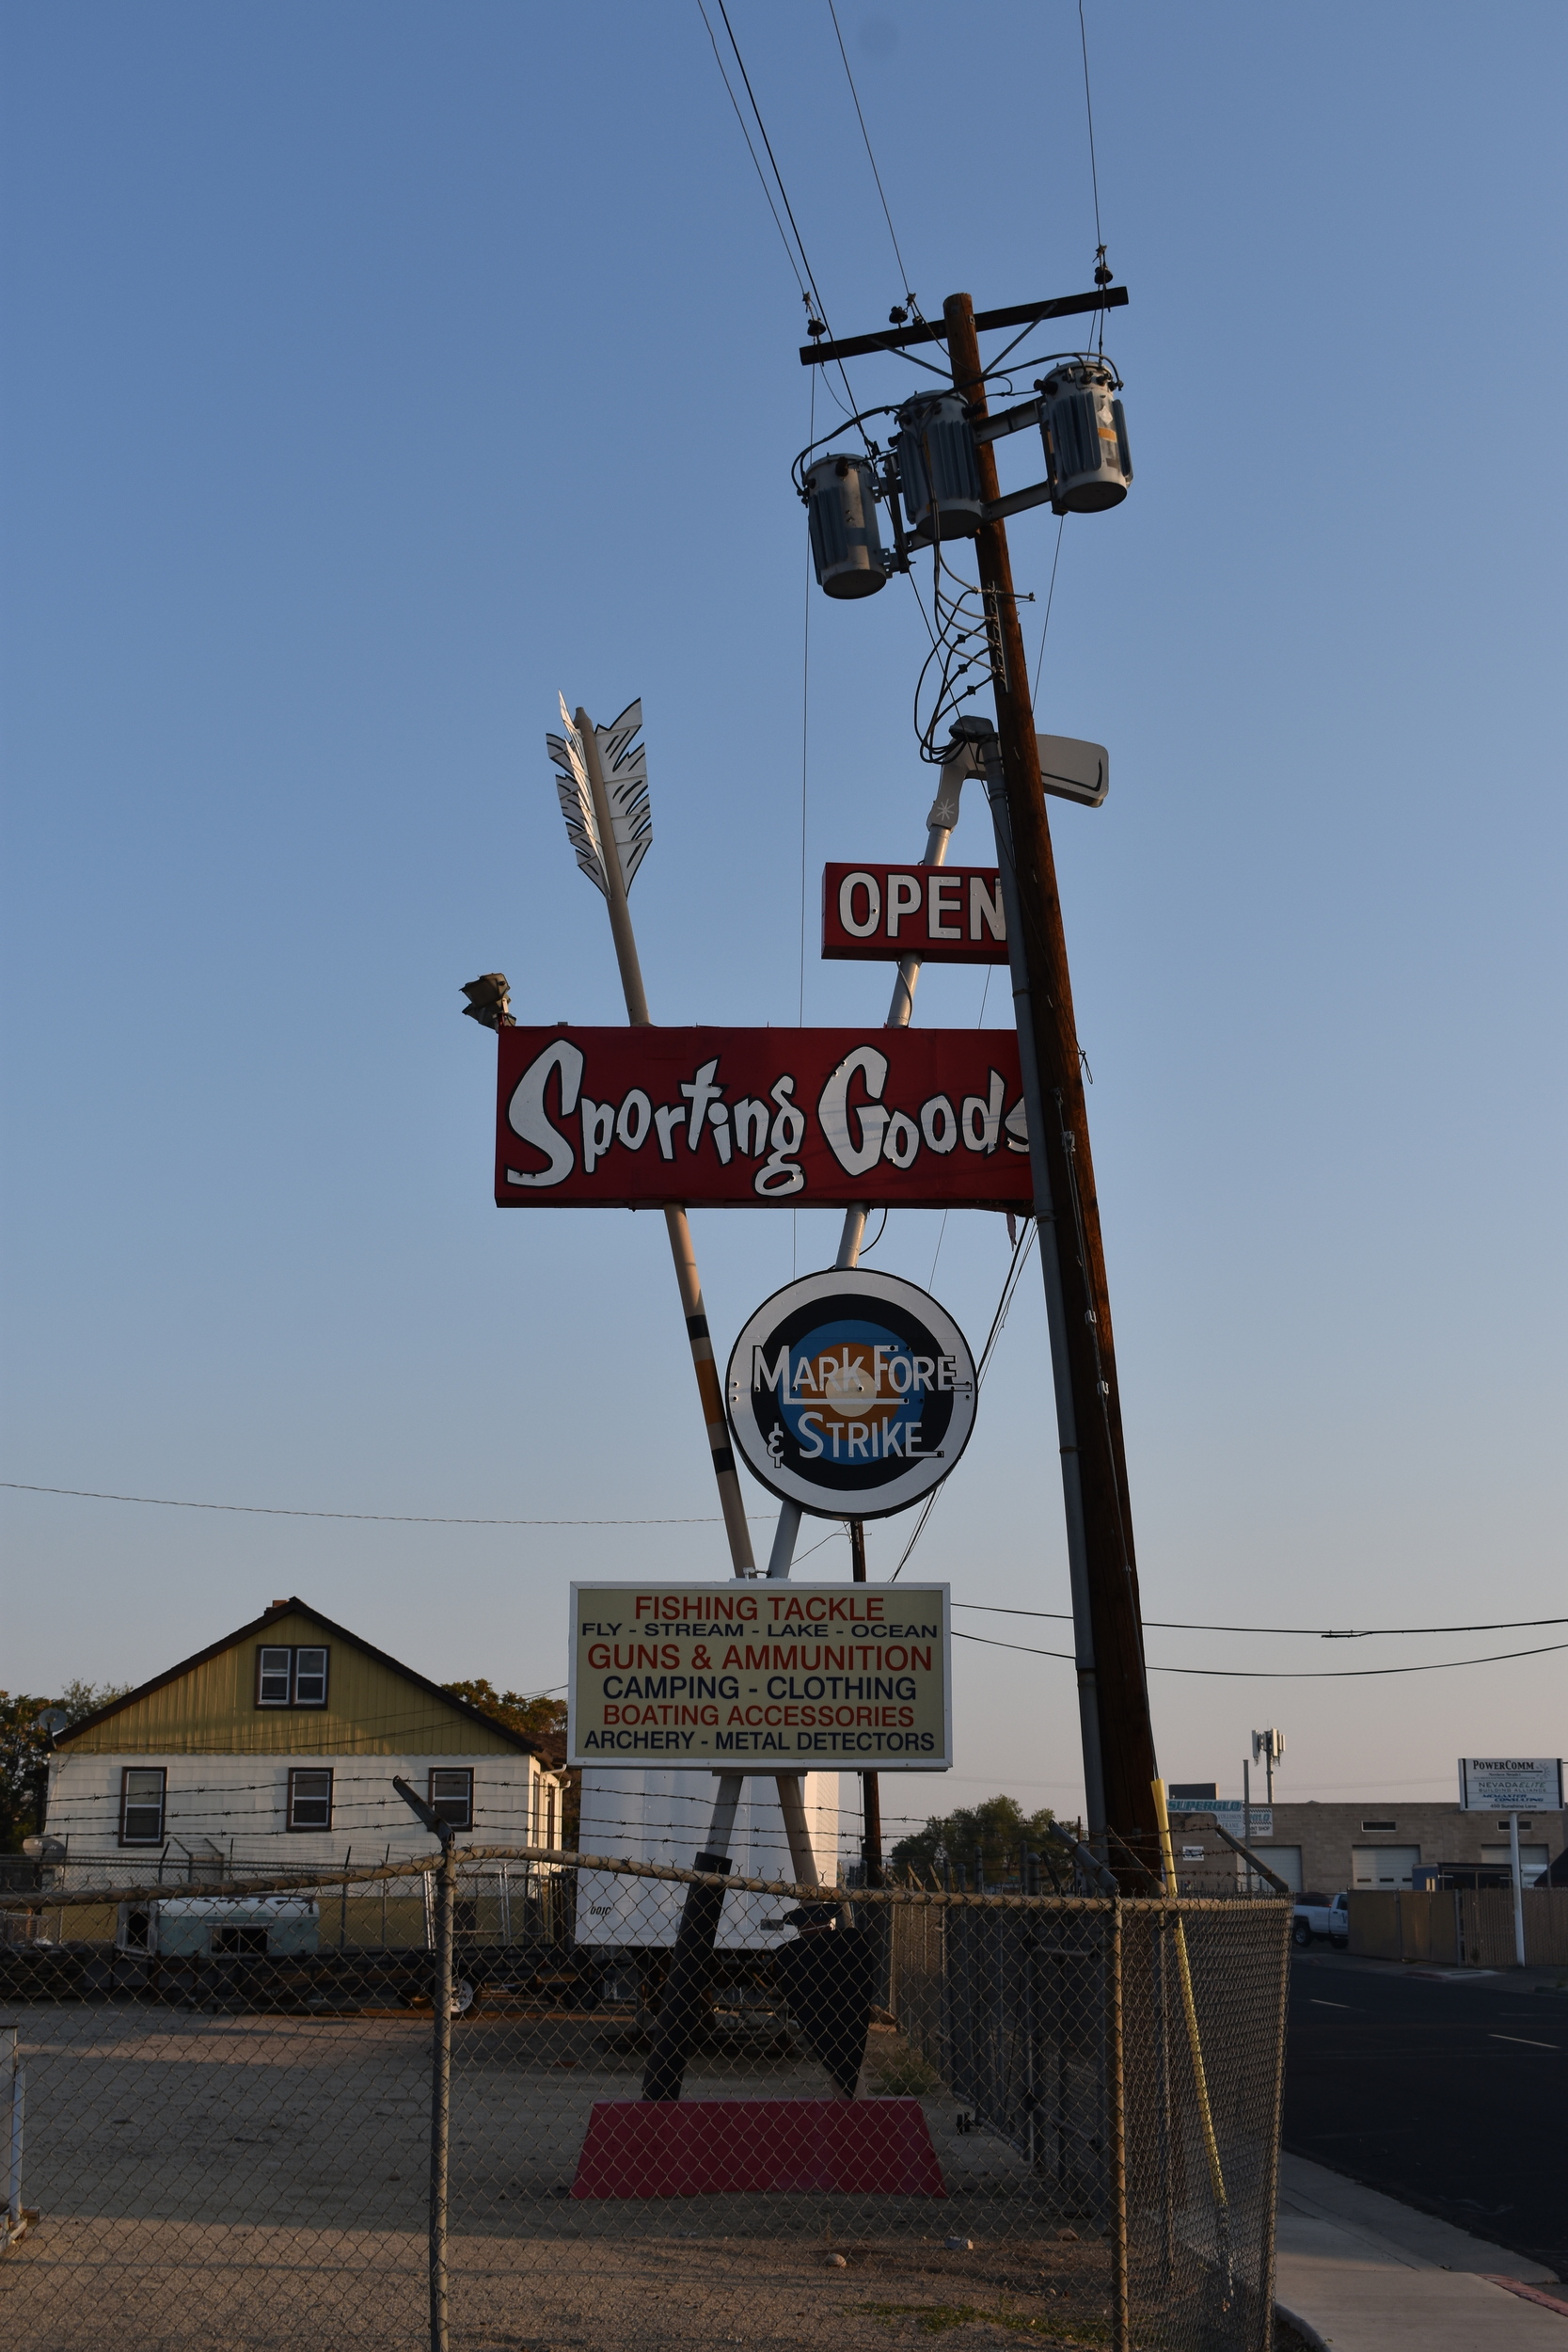 Mark Fore & Strike Sporting Goods mounted sign, Reno, Nevada